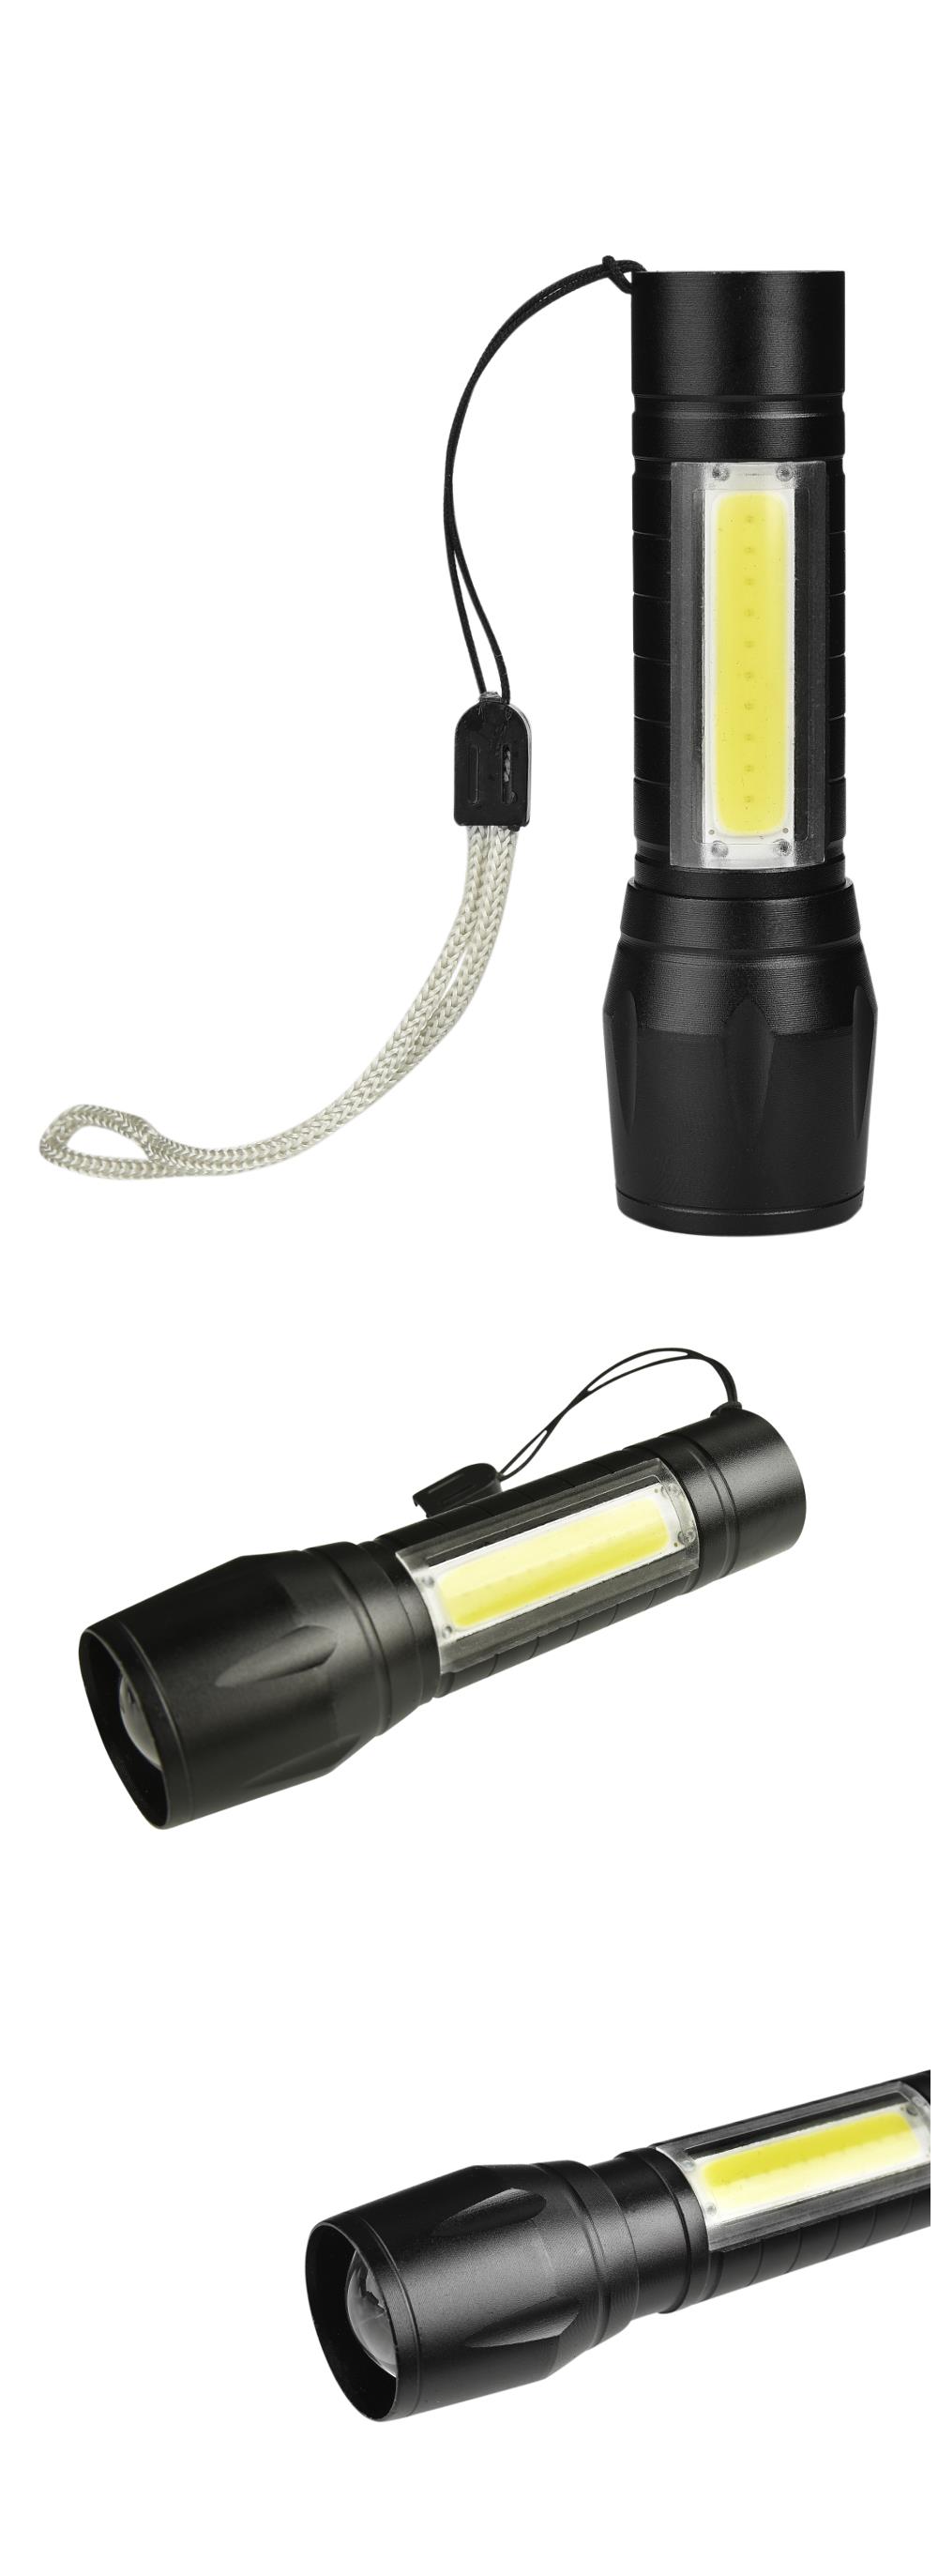 XANES-1517B-XPECOB-Dual-Lights-1000Lumens-Zoomable-USB-Rechargeable-EDC-Tactical-LED-Flashlight-Suit-1306622